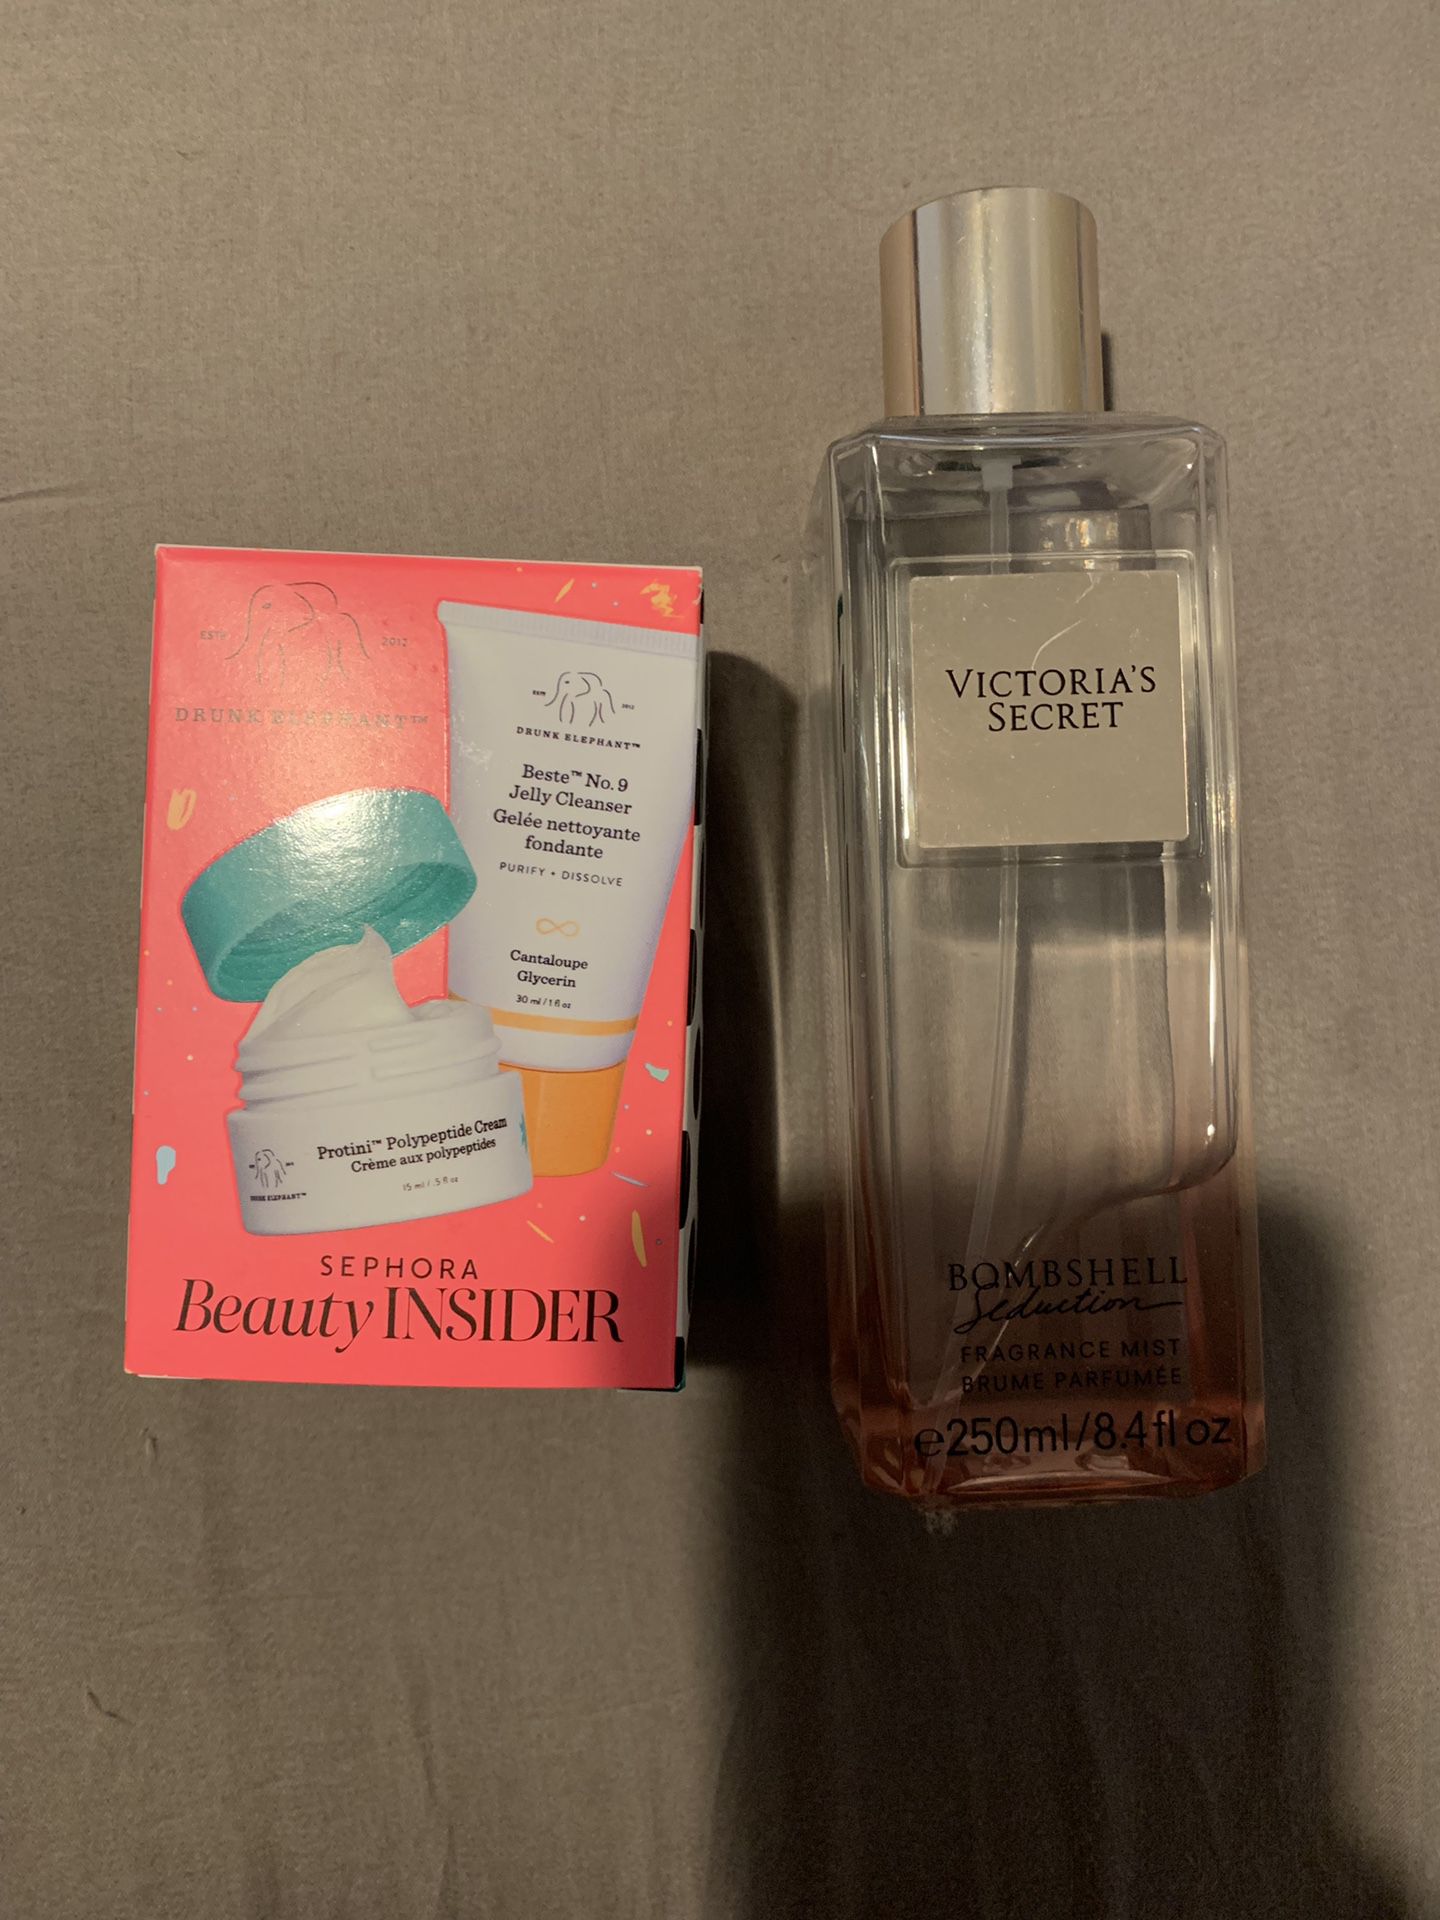 Vs Perfume & drunk elephant mini face cleanser and creme